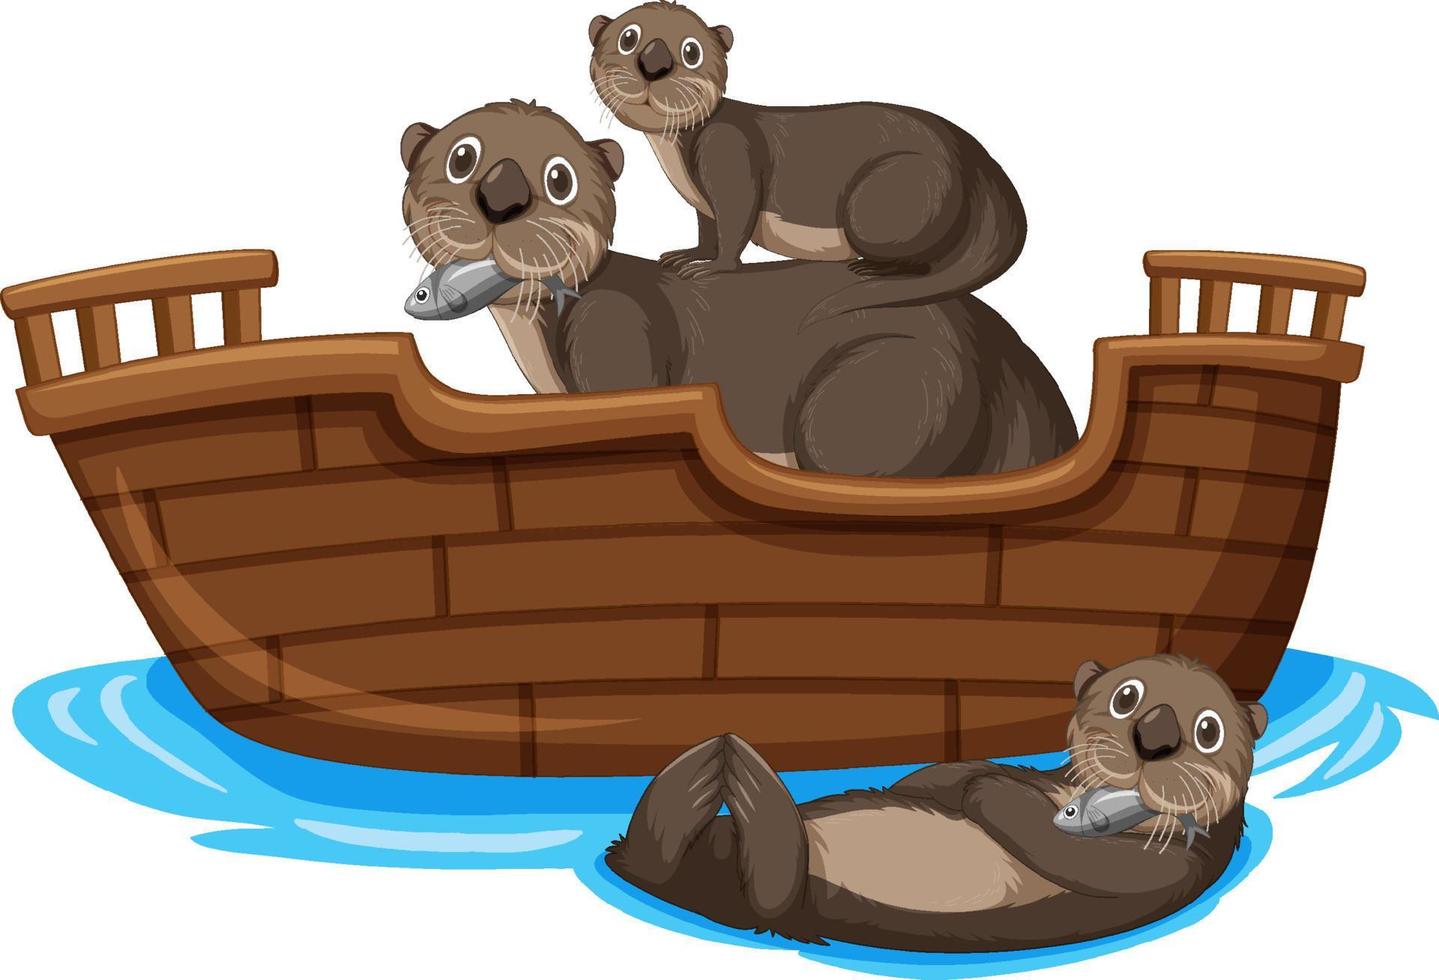 Otters on wooden boat in cartoon style vector